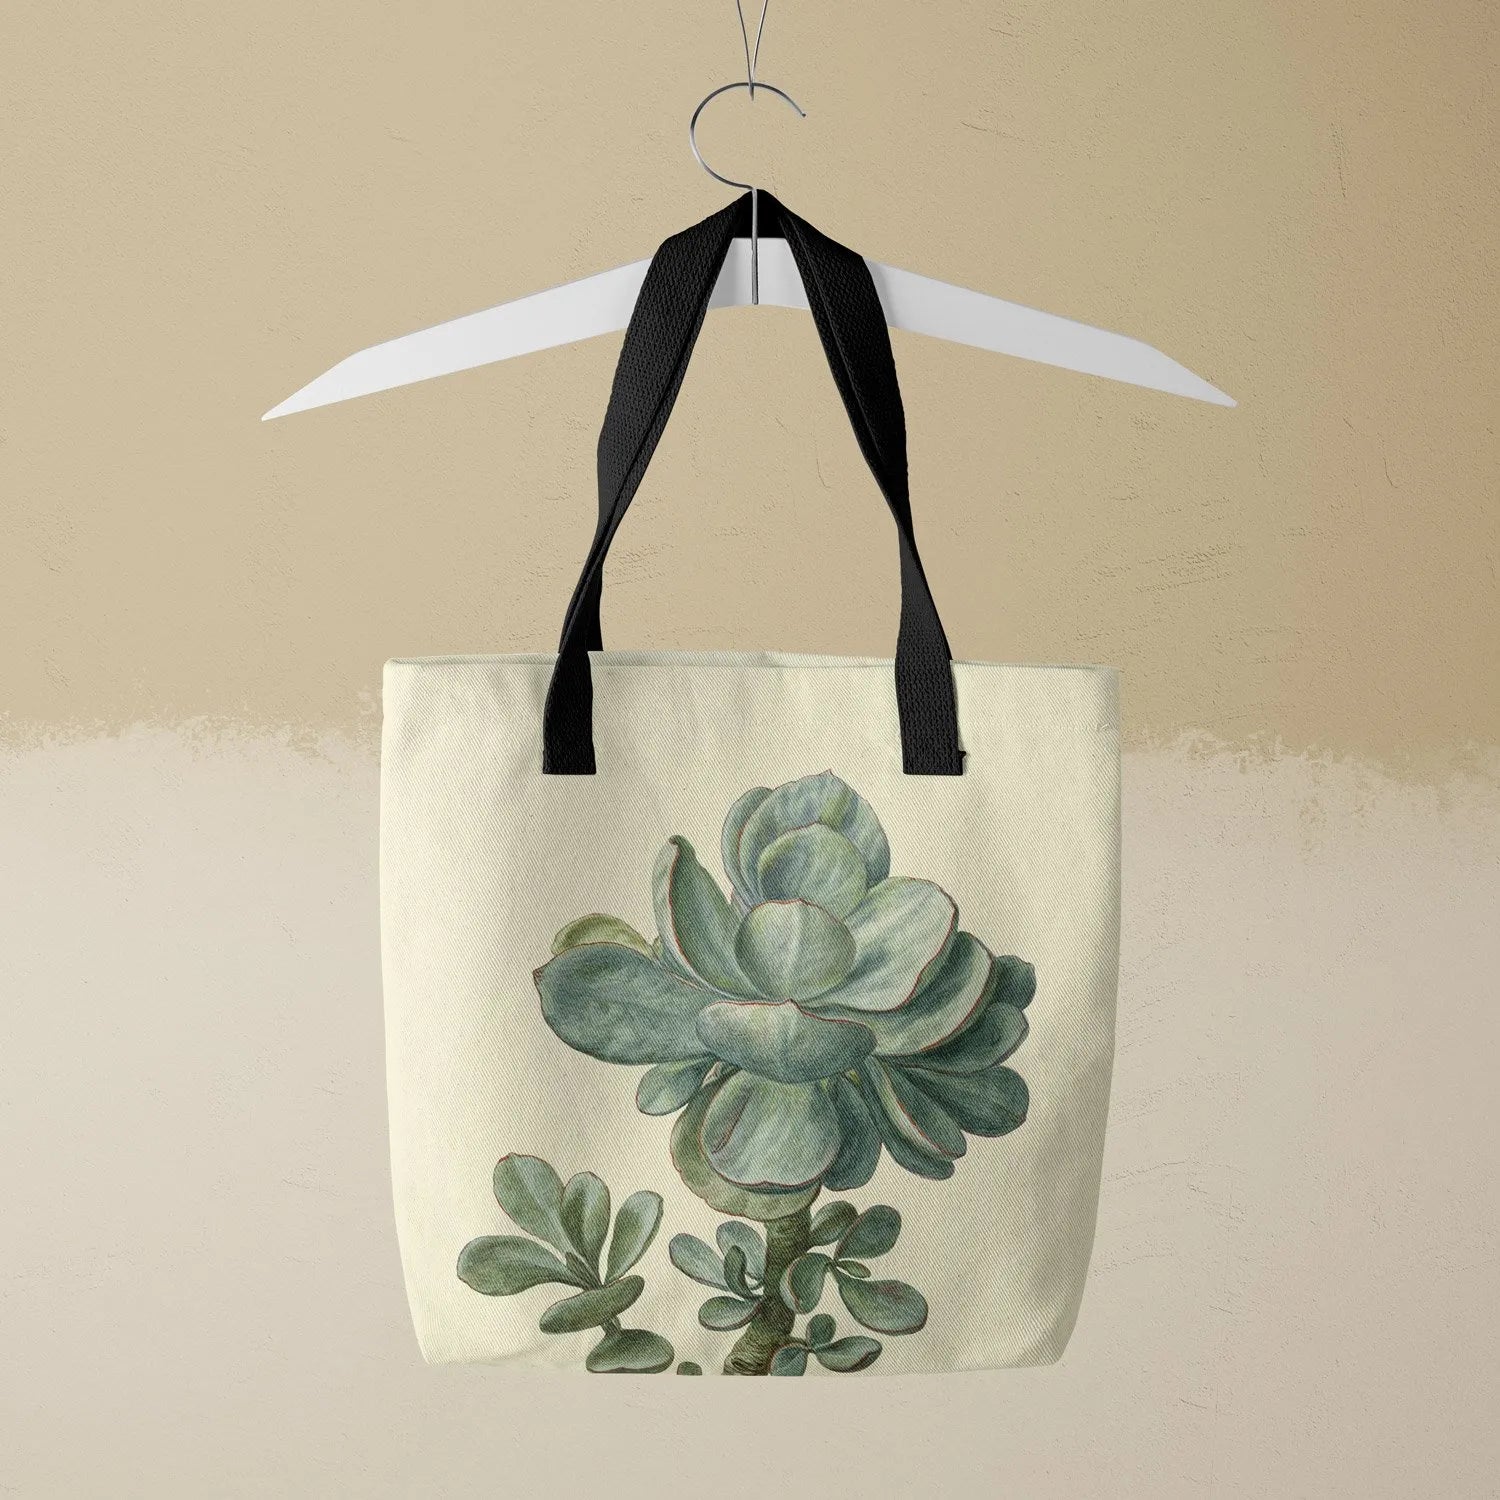 Little Green Man Tote - New Dawn - Heavy Duty Reusable Grocery Bag - Black Handles - Shopping Totes - Aesthetic Art